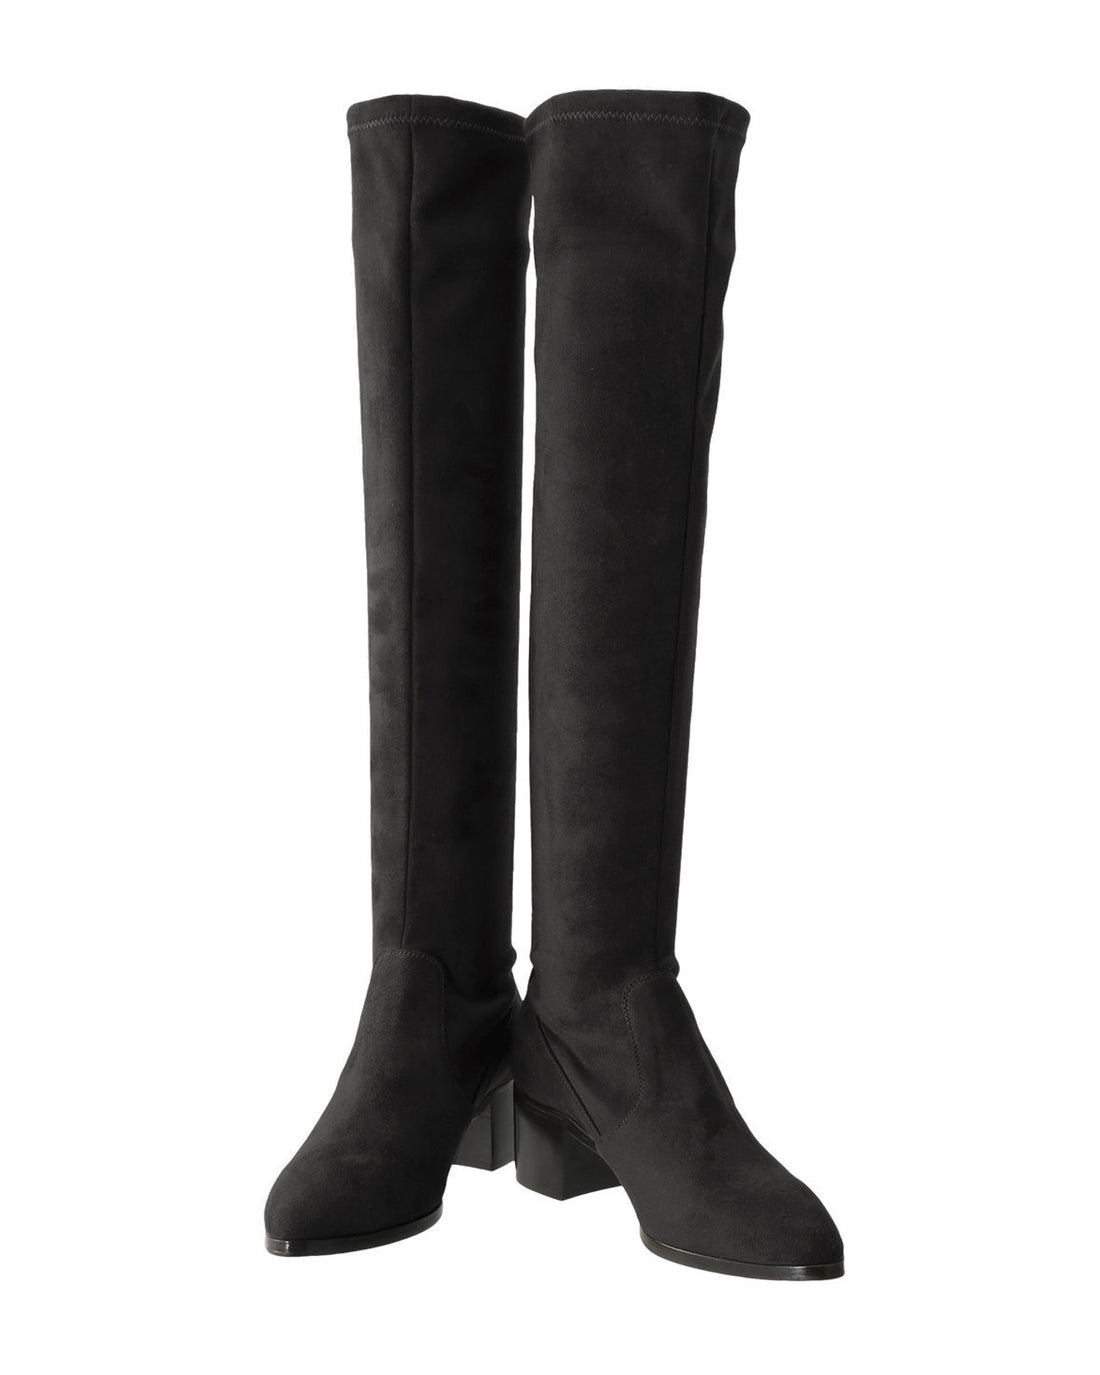 FABIO RUSCONI for AMARC stretch knee high boots